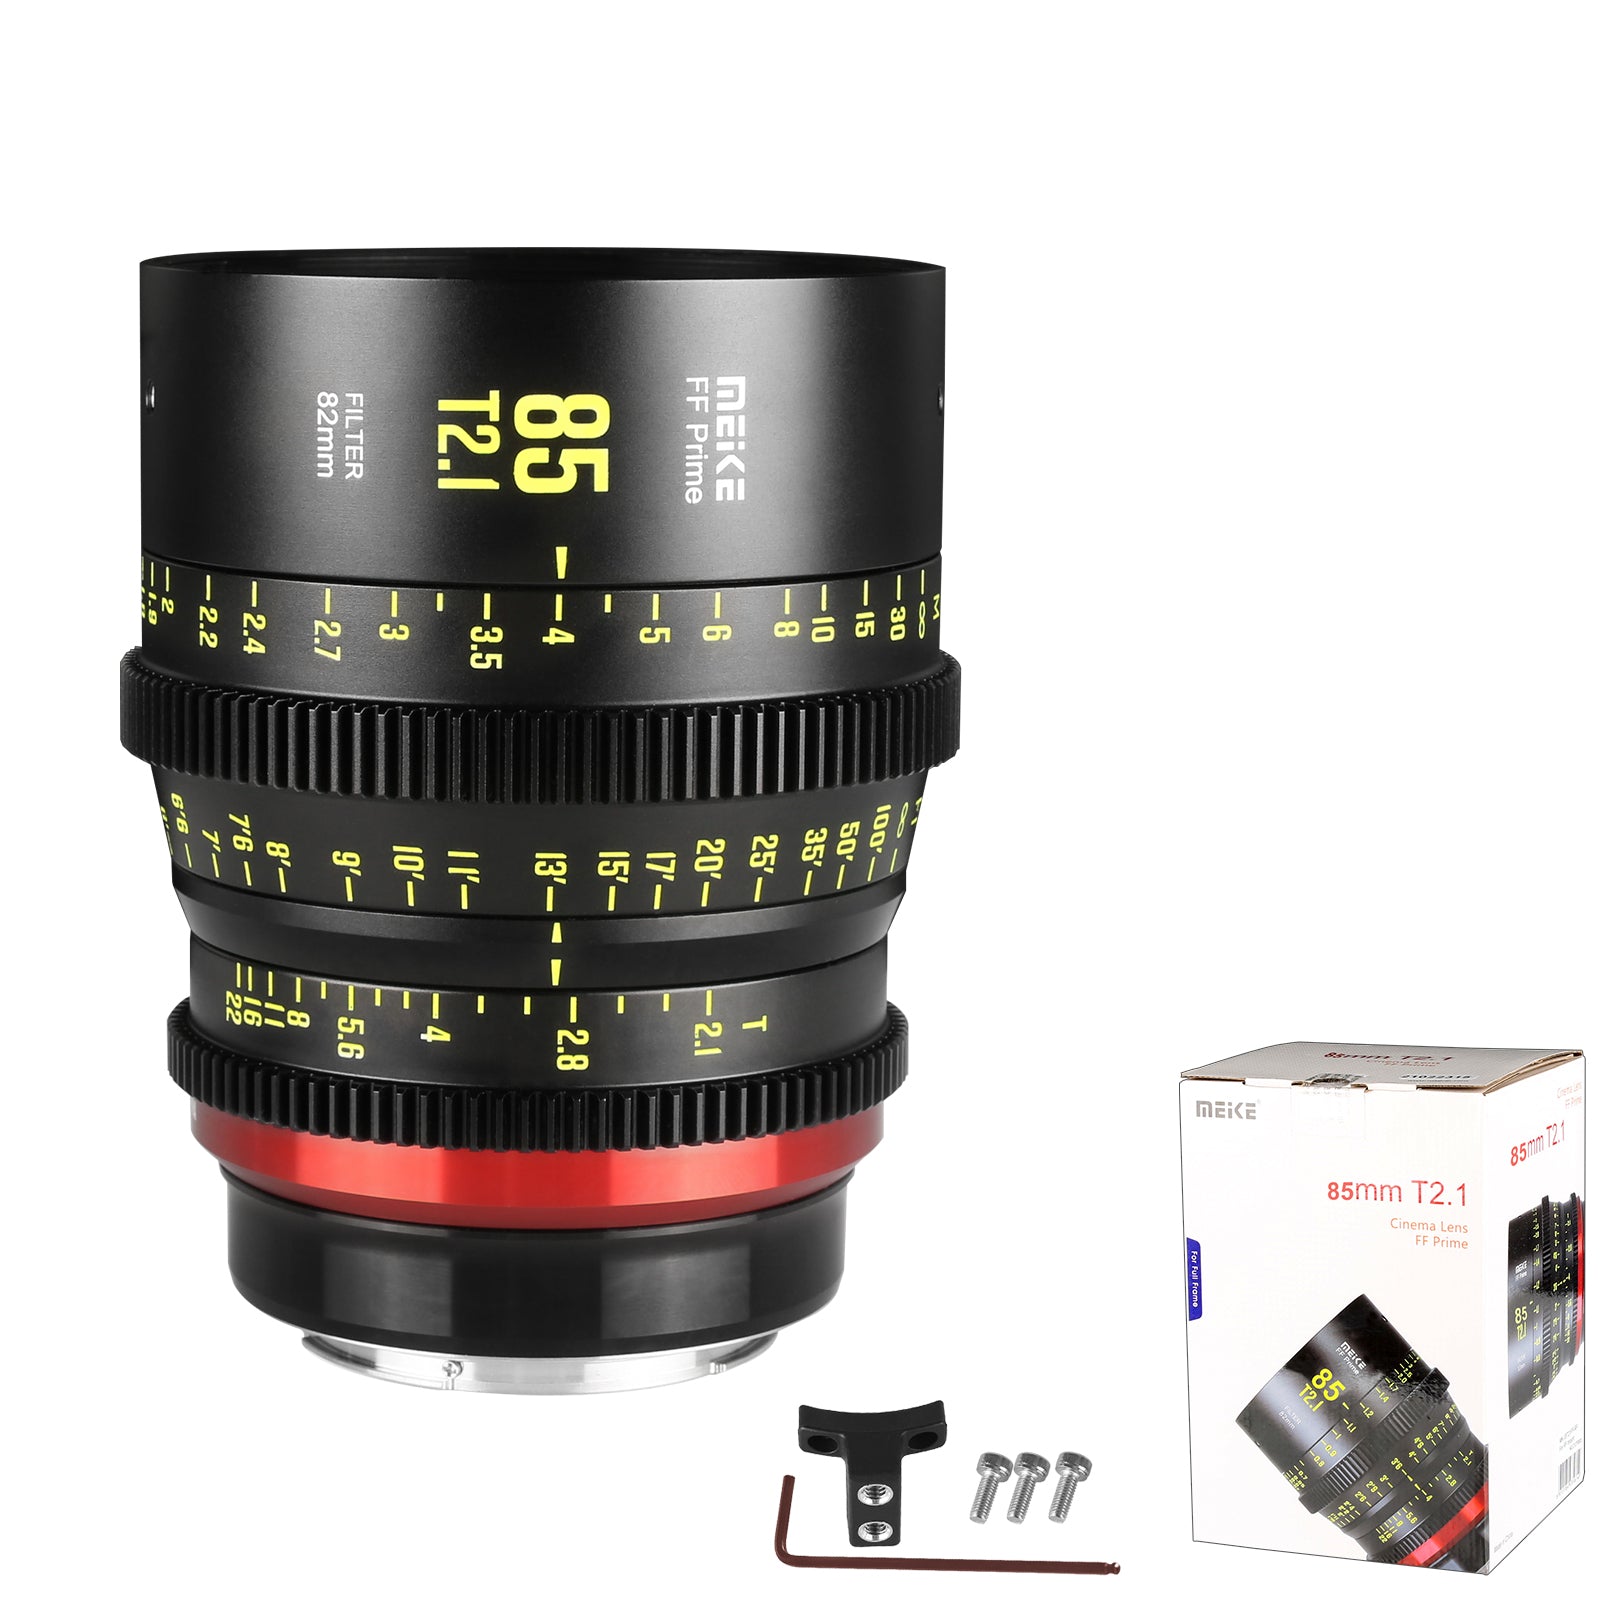 Meike Cinema Full Frame Cinema Prime 85mm T2.1 Lens (Canon EF Mount) with Accessories and a Box